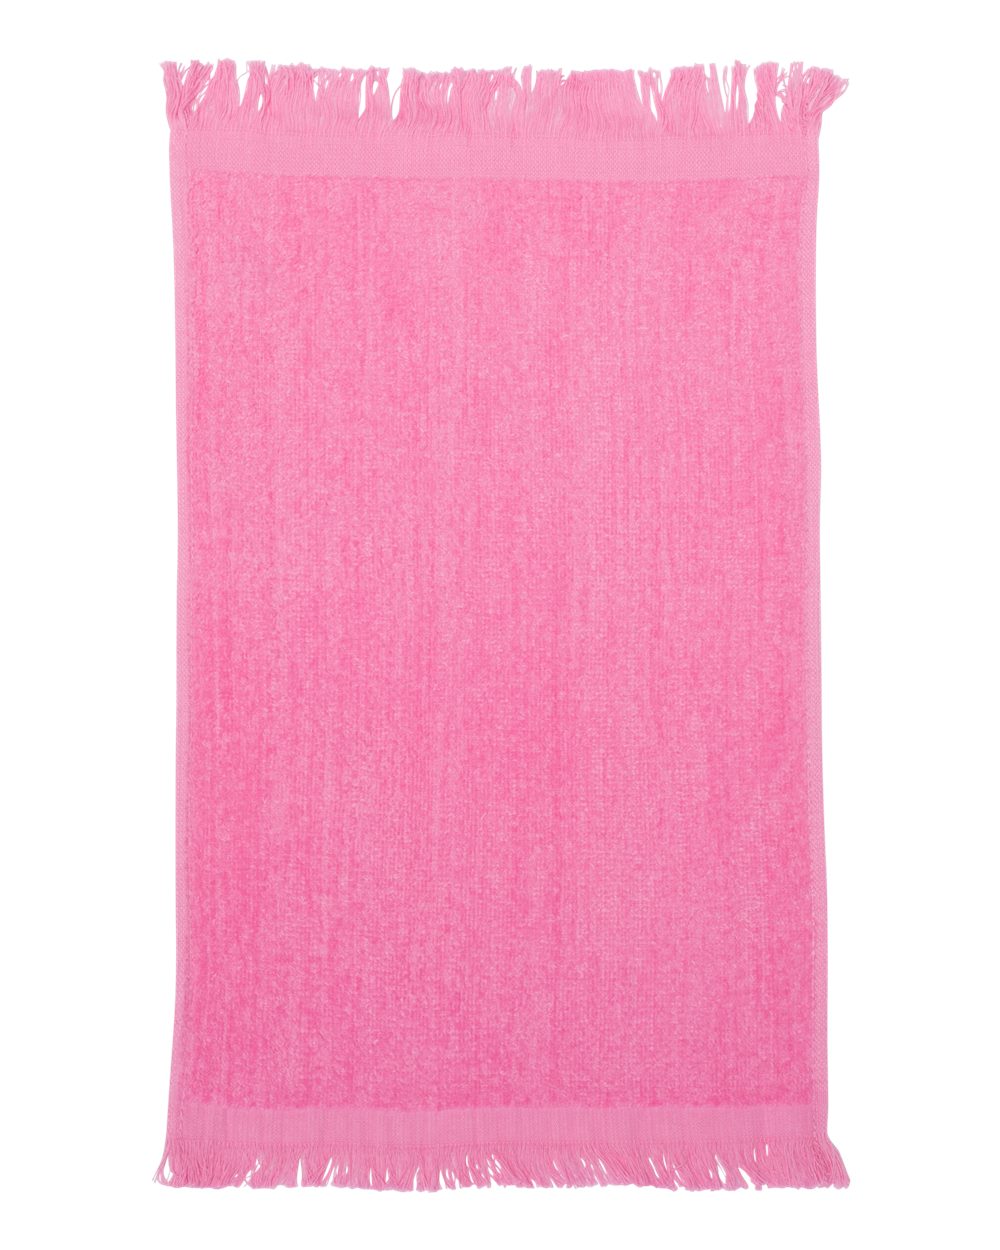 Q-Tees Fringed Fingertip Towel T100   *17 Colors to Choose From* 